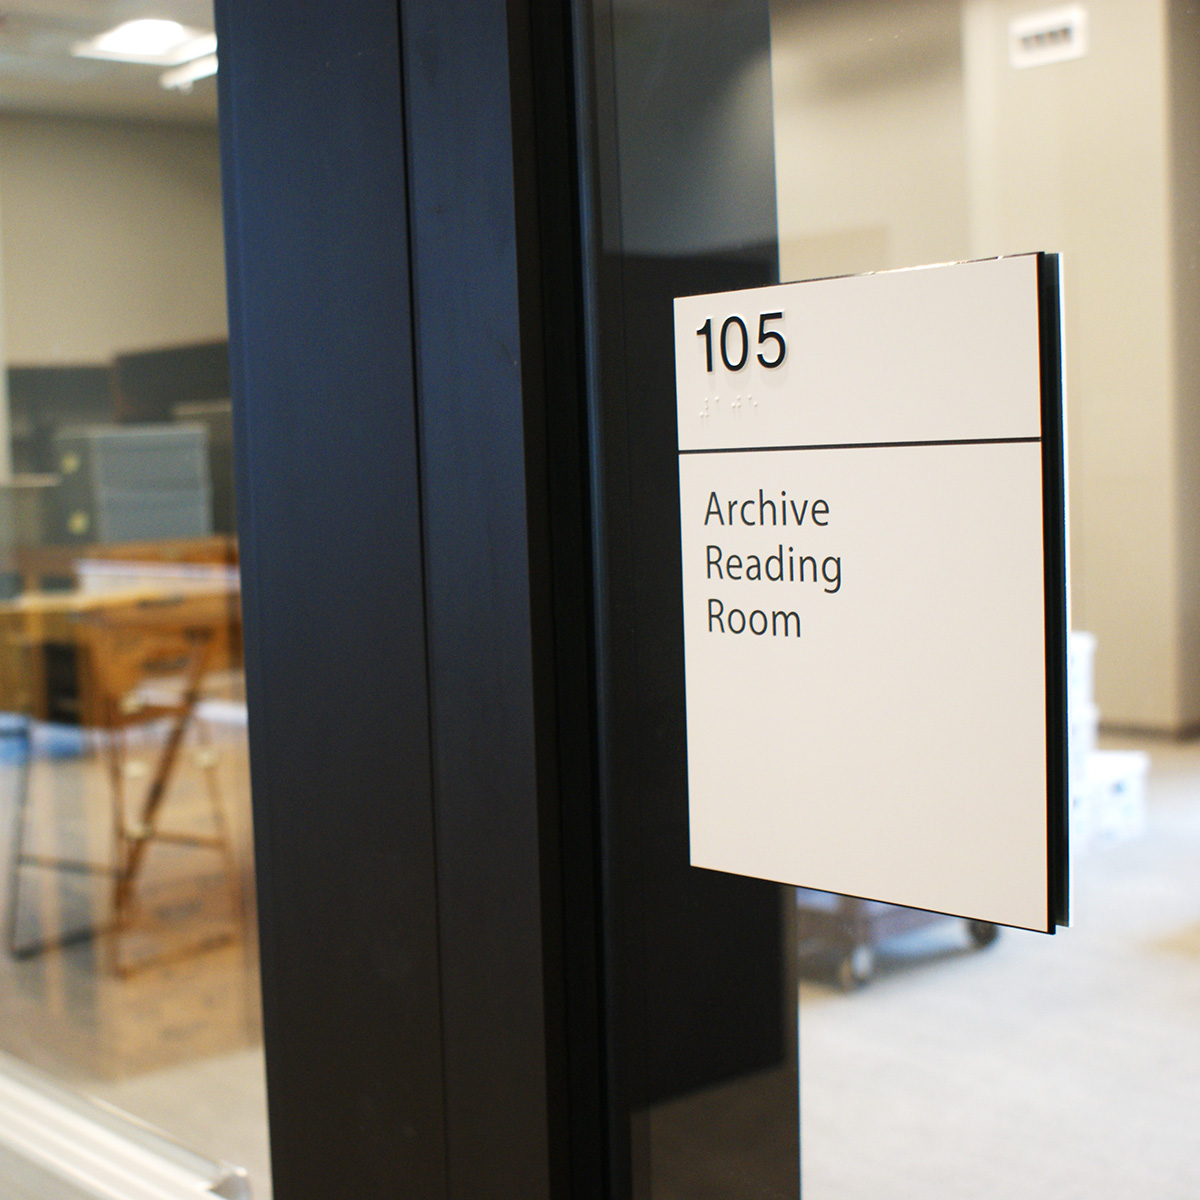 color image of "Archive Reading Room" sign